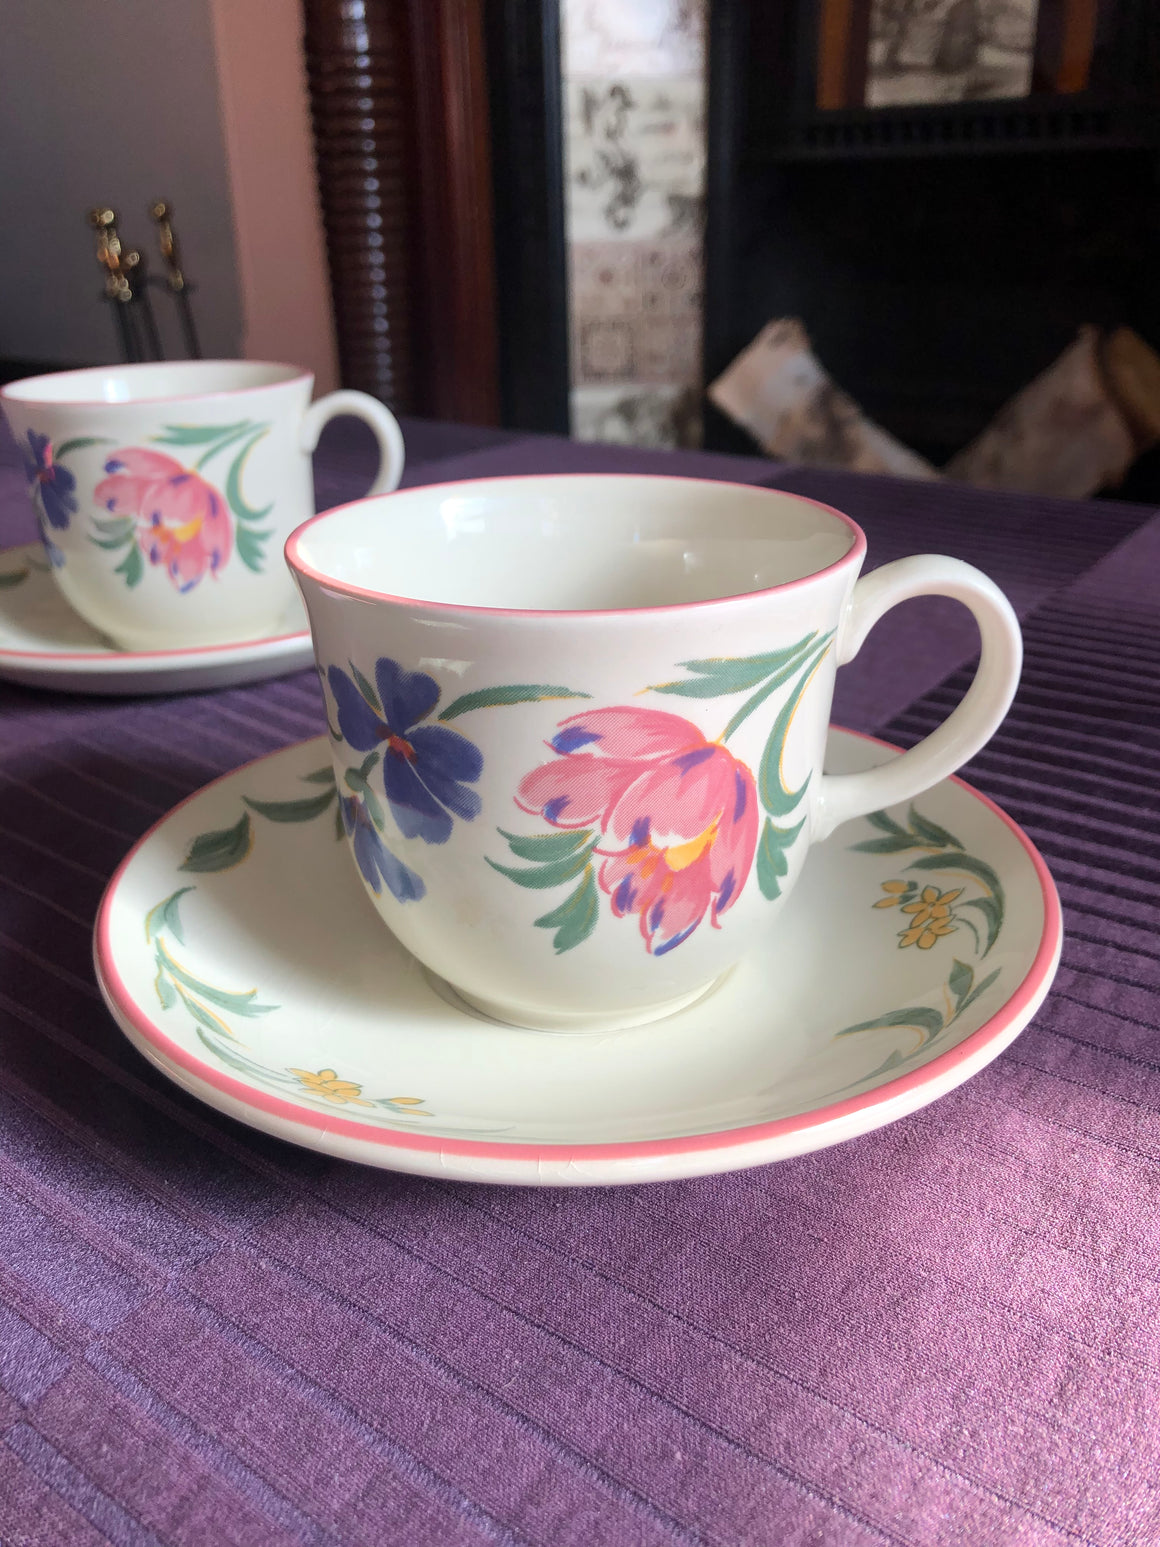 Set of 8 Staffordshire Tableware Chelsea Coffee Cups and Saucers